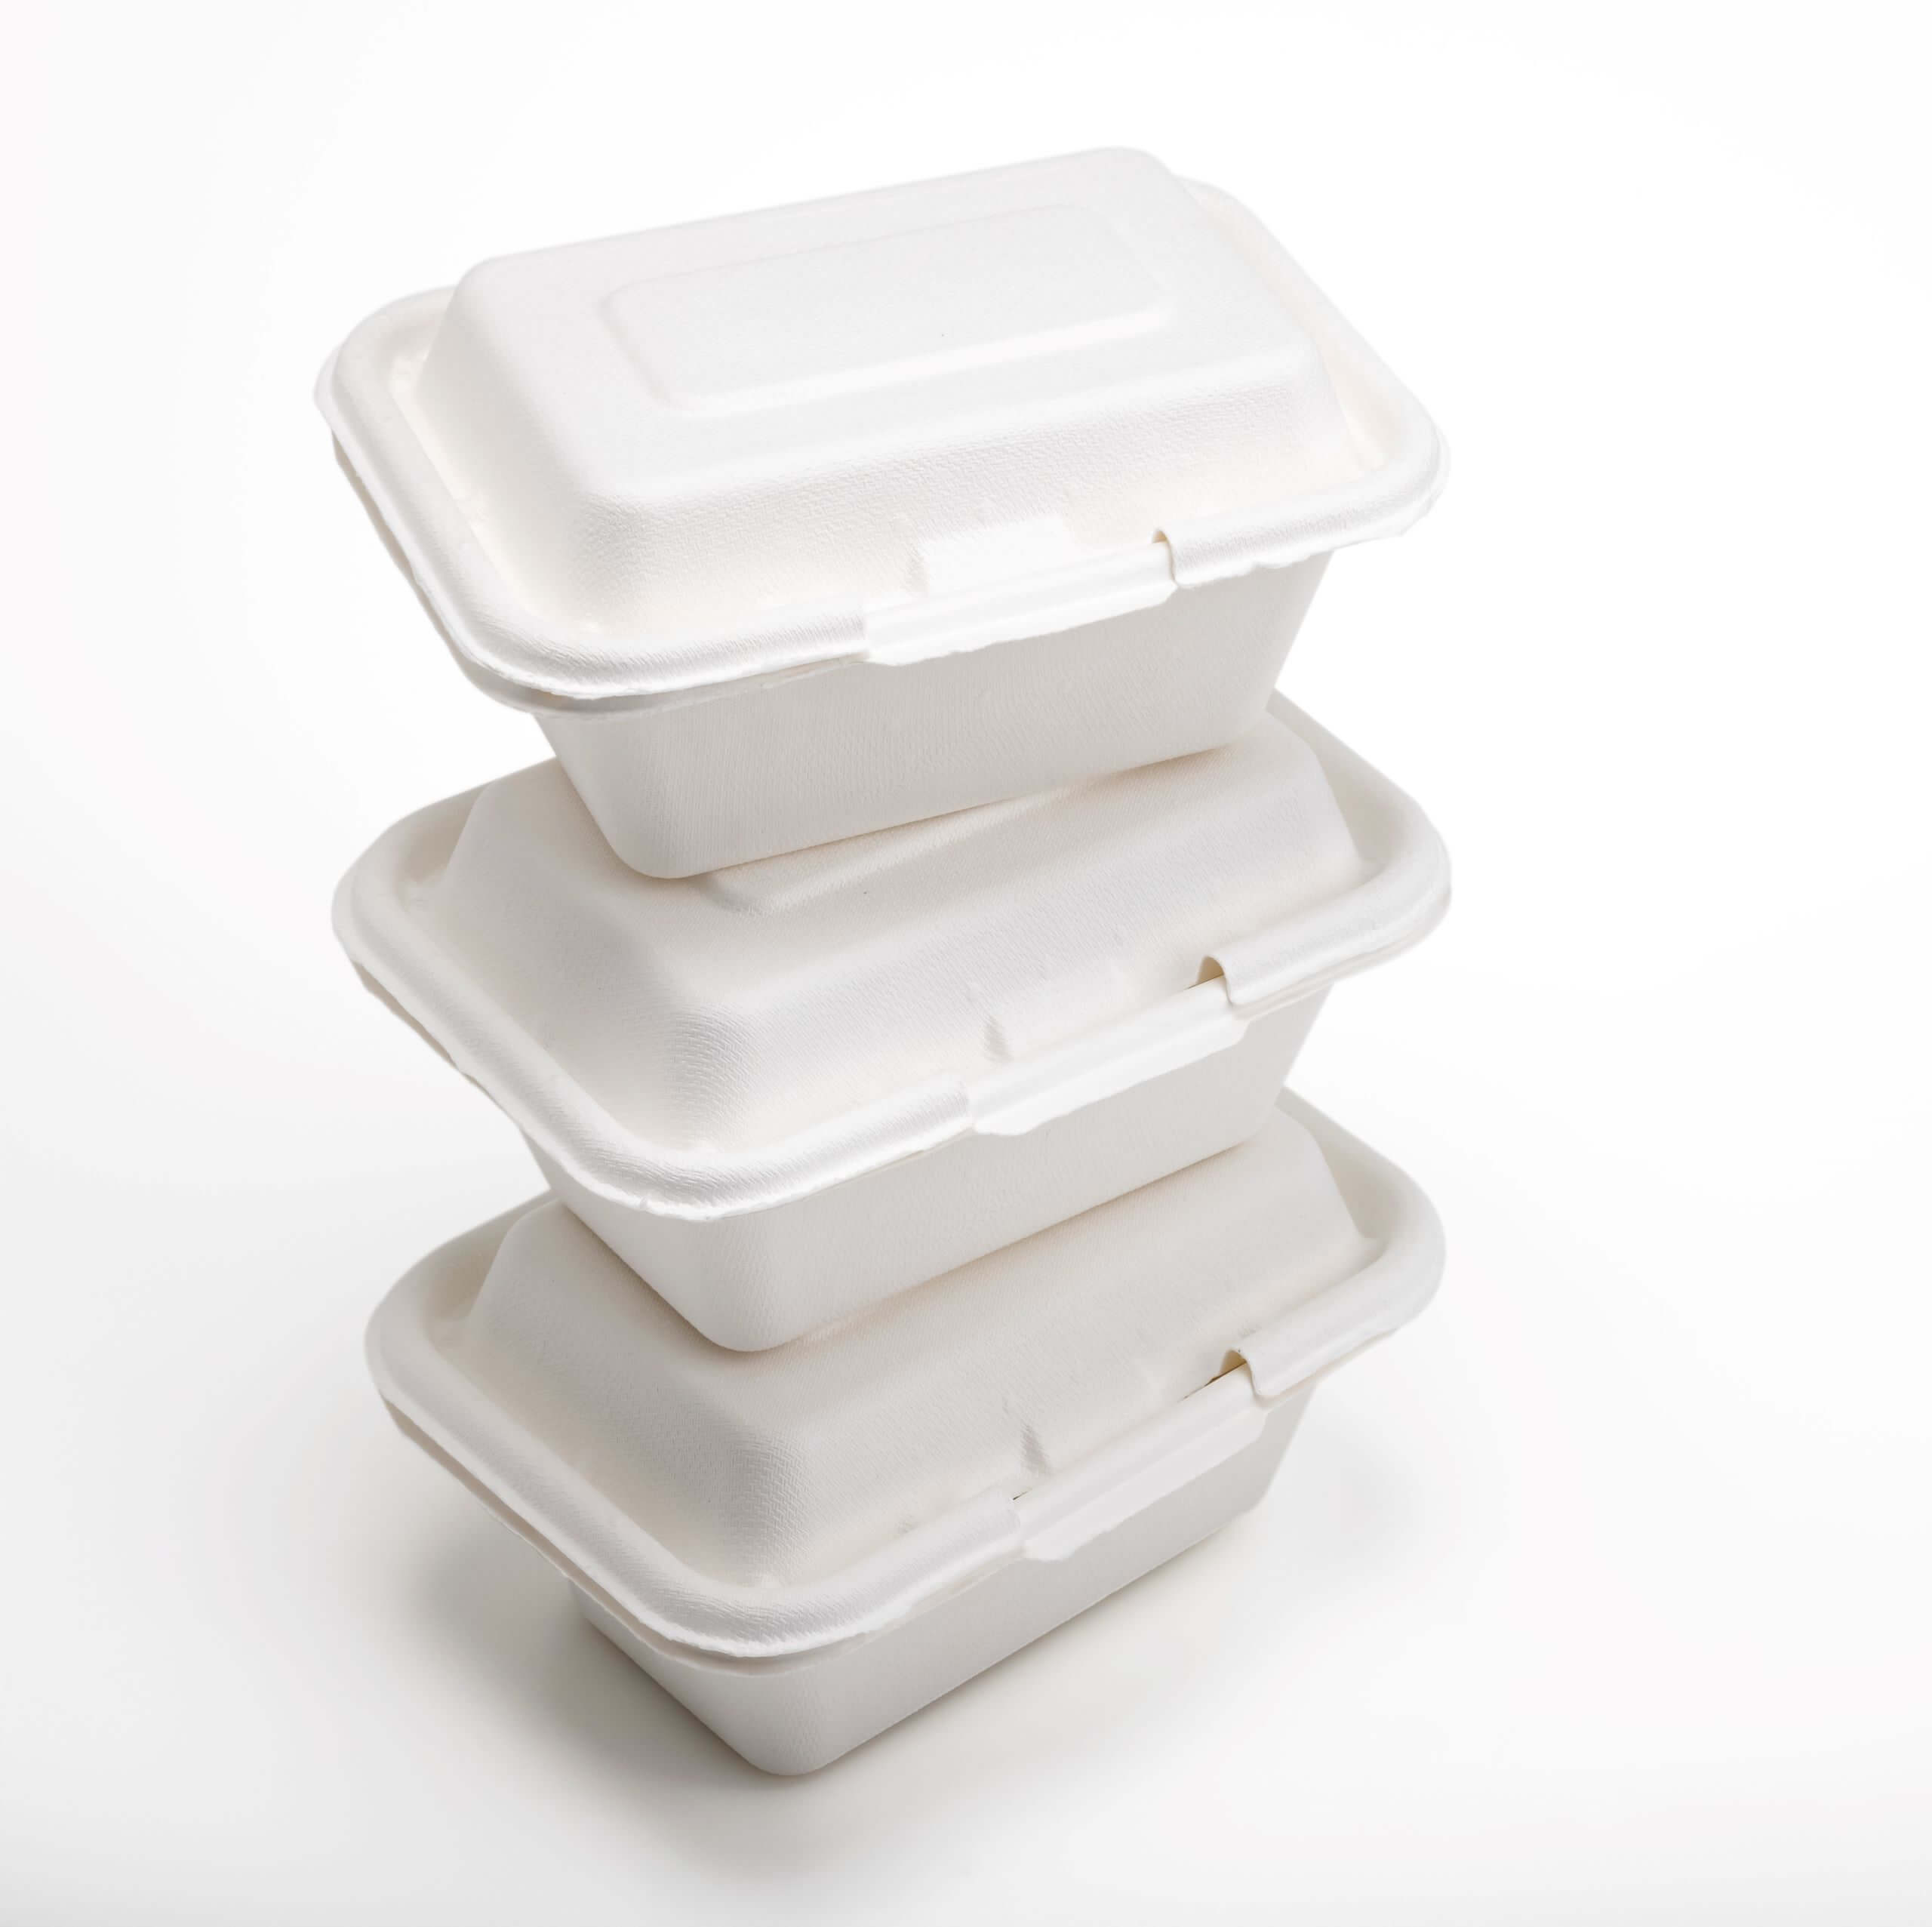 An image of our Kraft and Bagasse Containers.